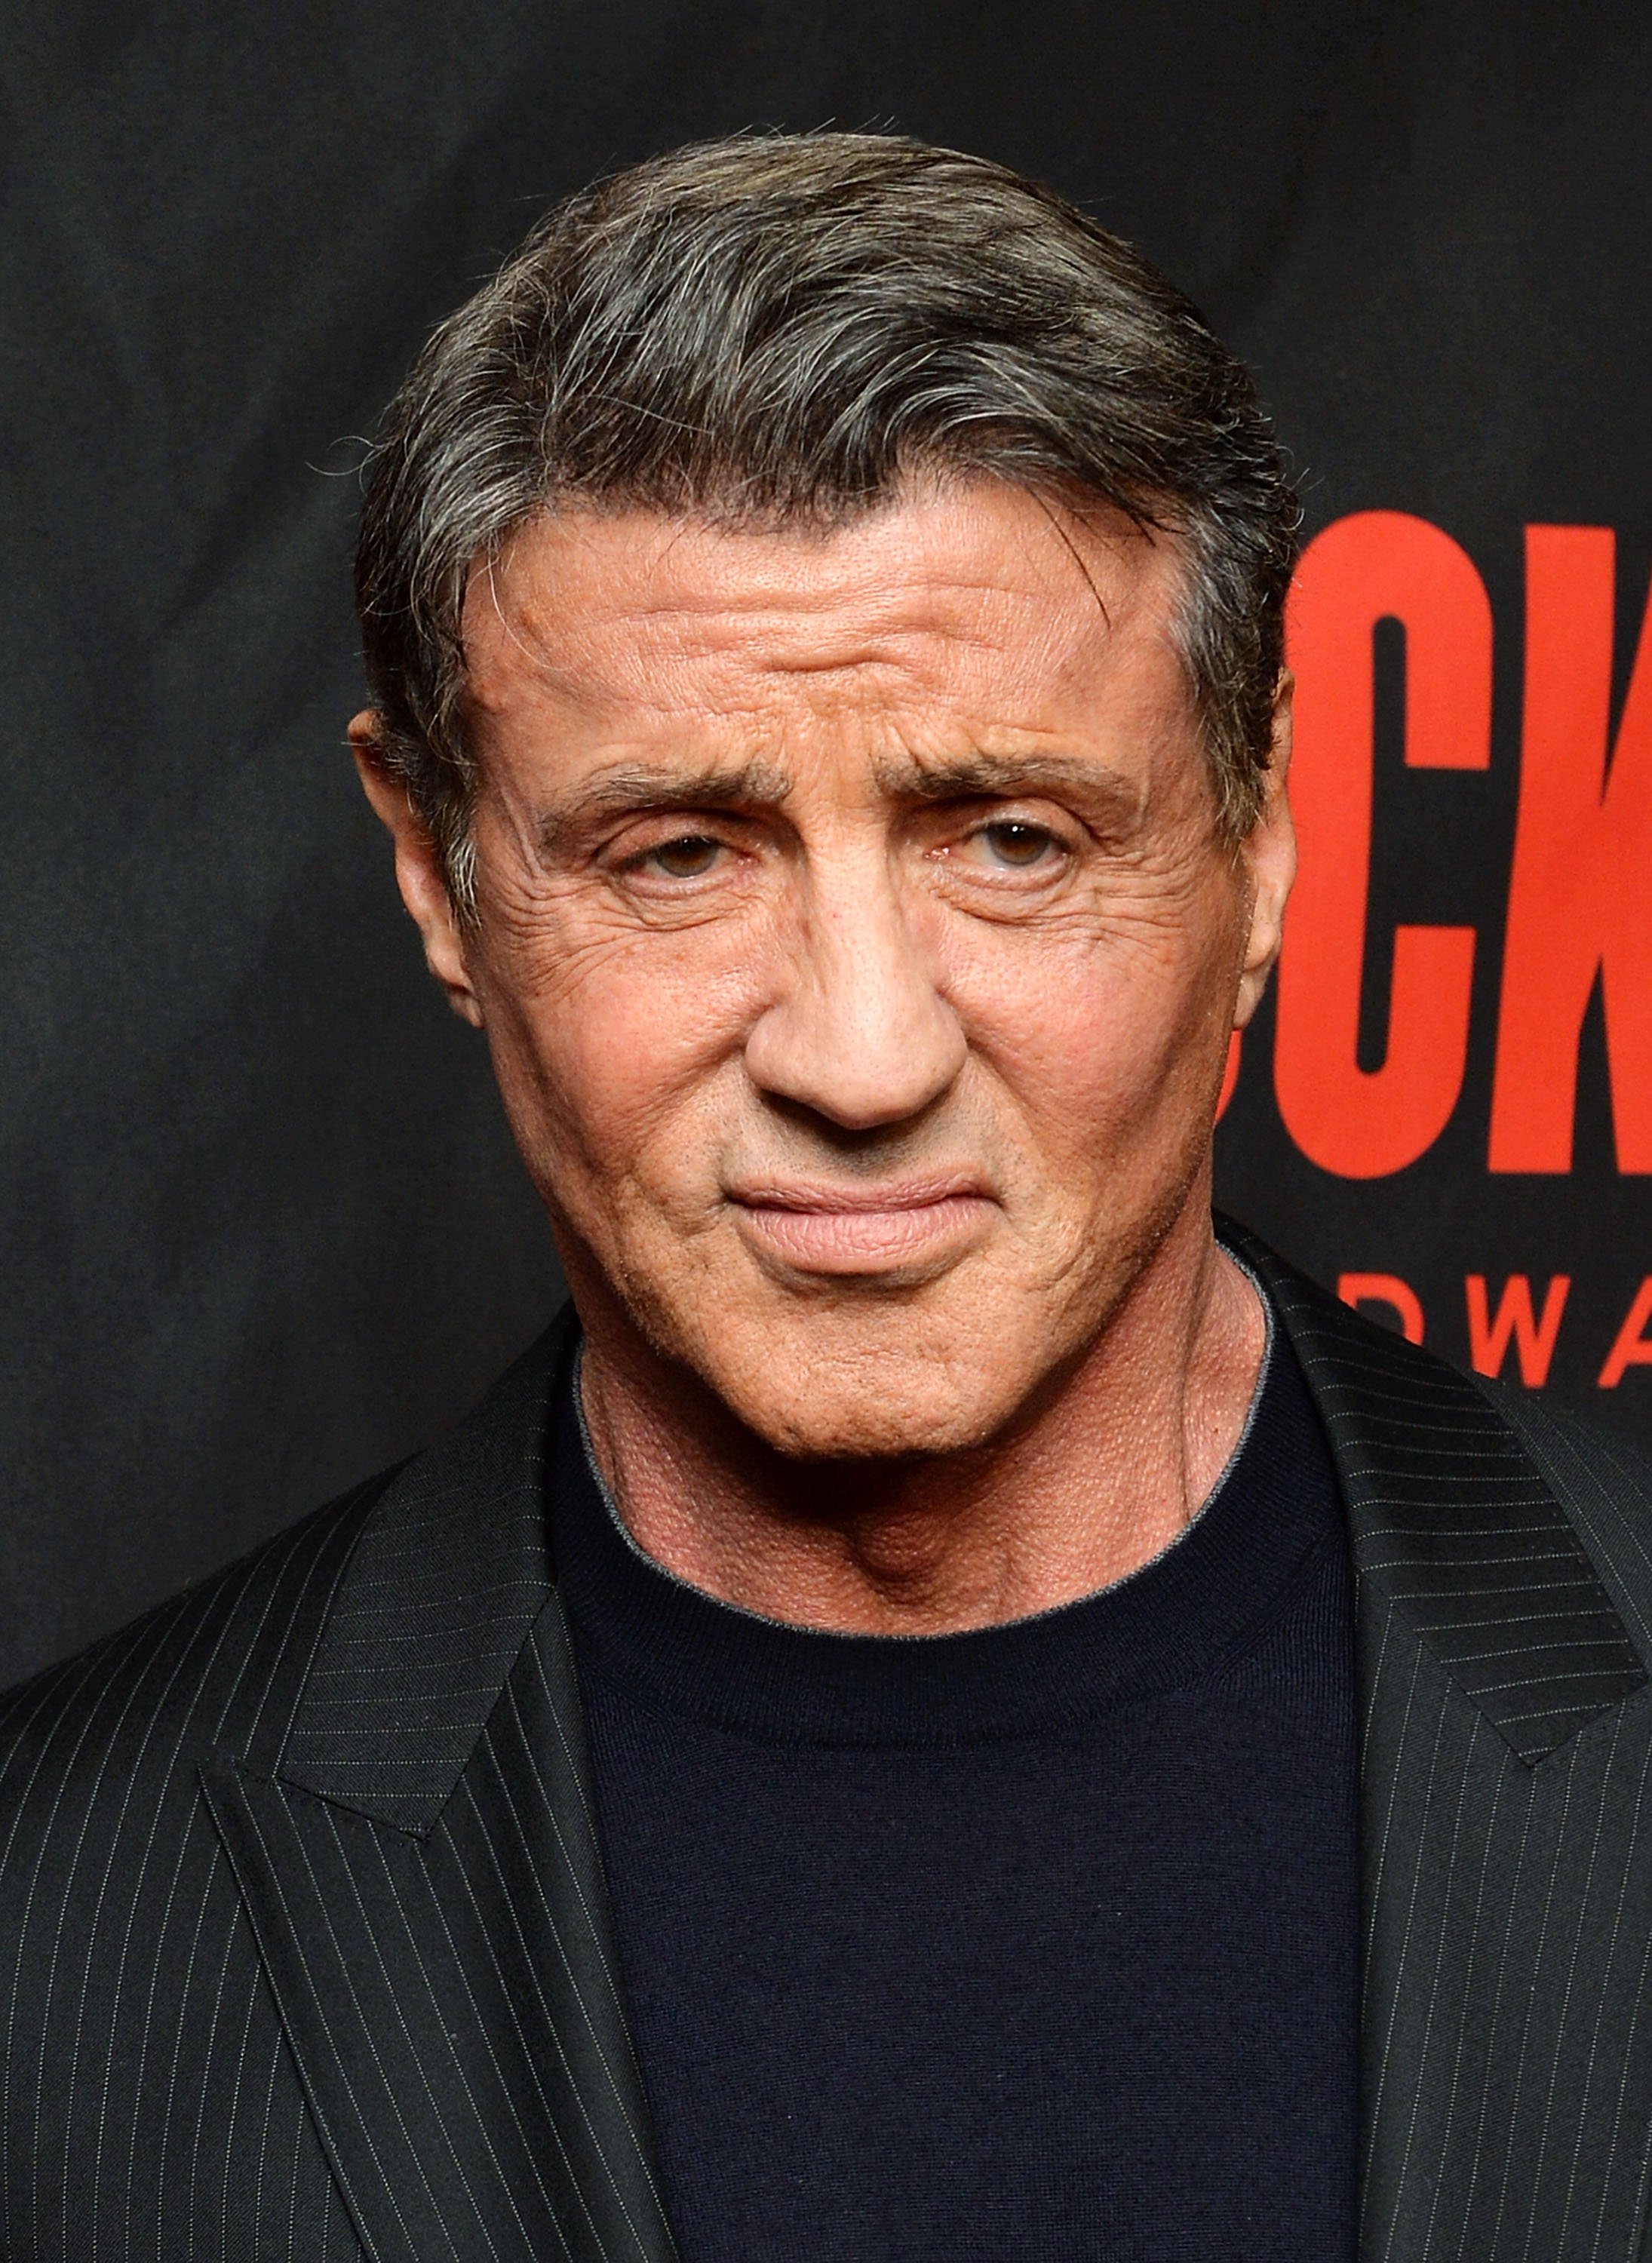 Sylvester Stallone attends the "Rocky" Broadway opening night after party at Roseland Ballroom on March 13, 2014 in New York City | Photo: Getty Images